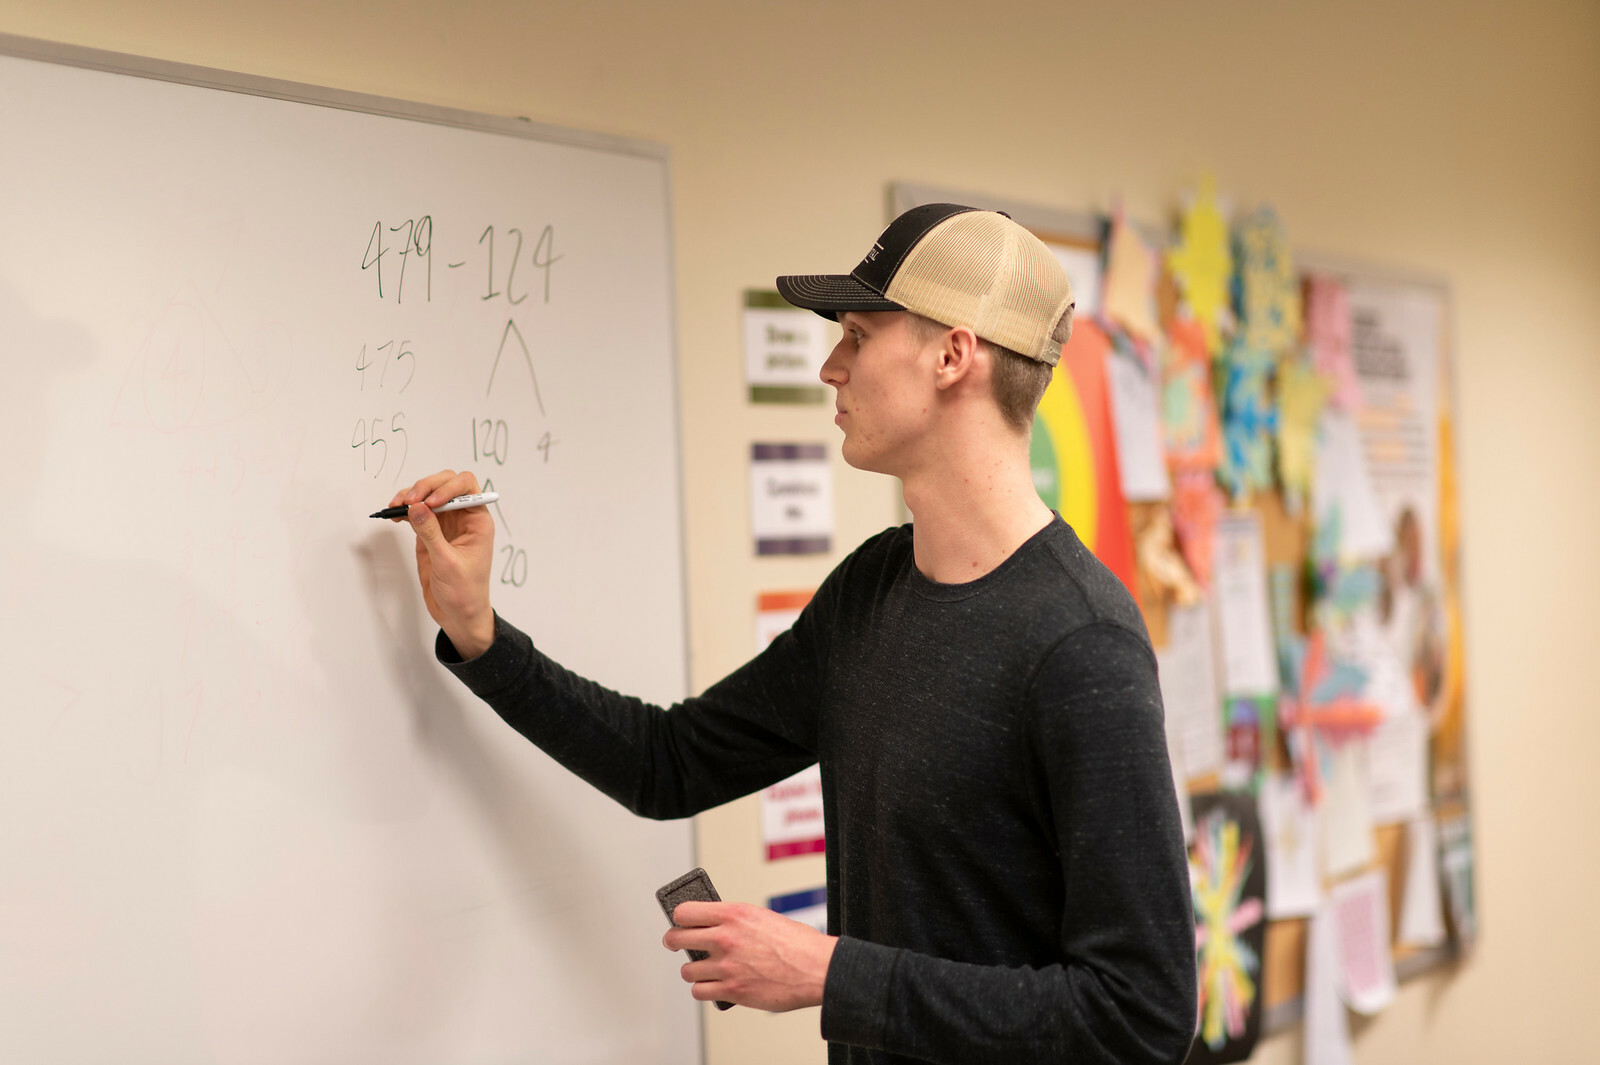 A student uses a whiteboard to work on a path problem